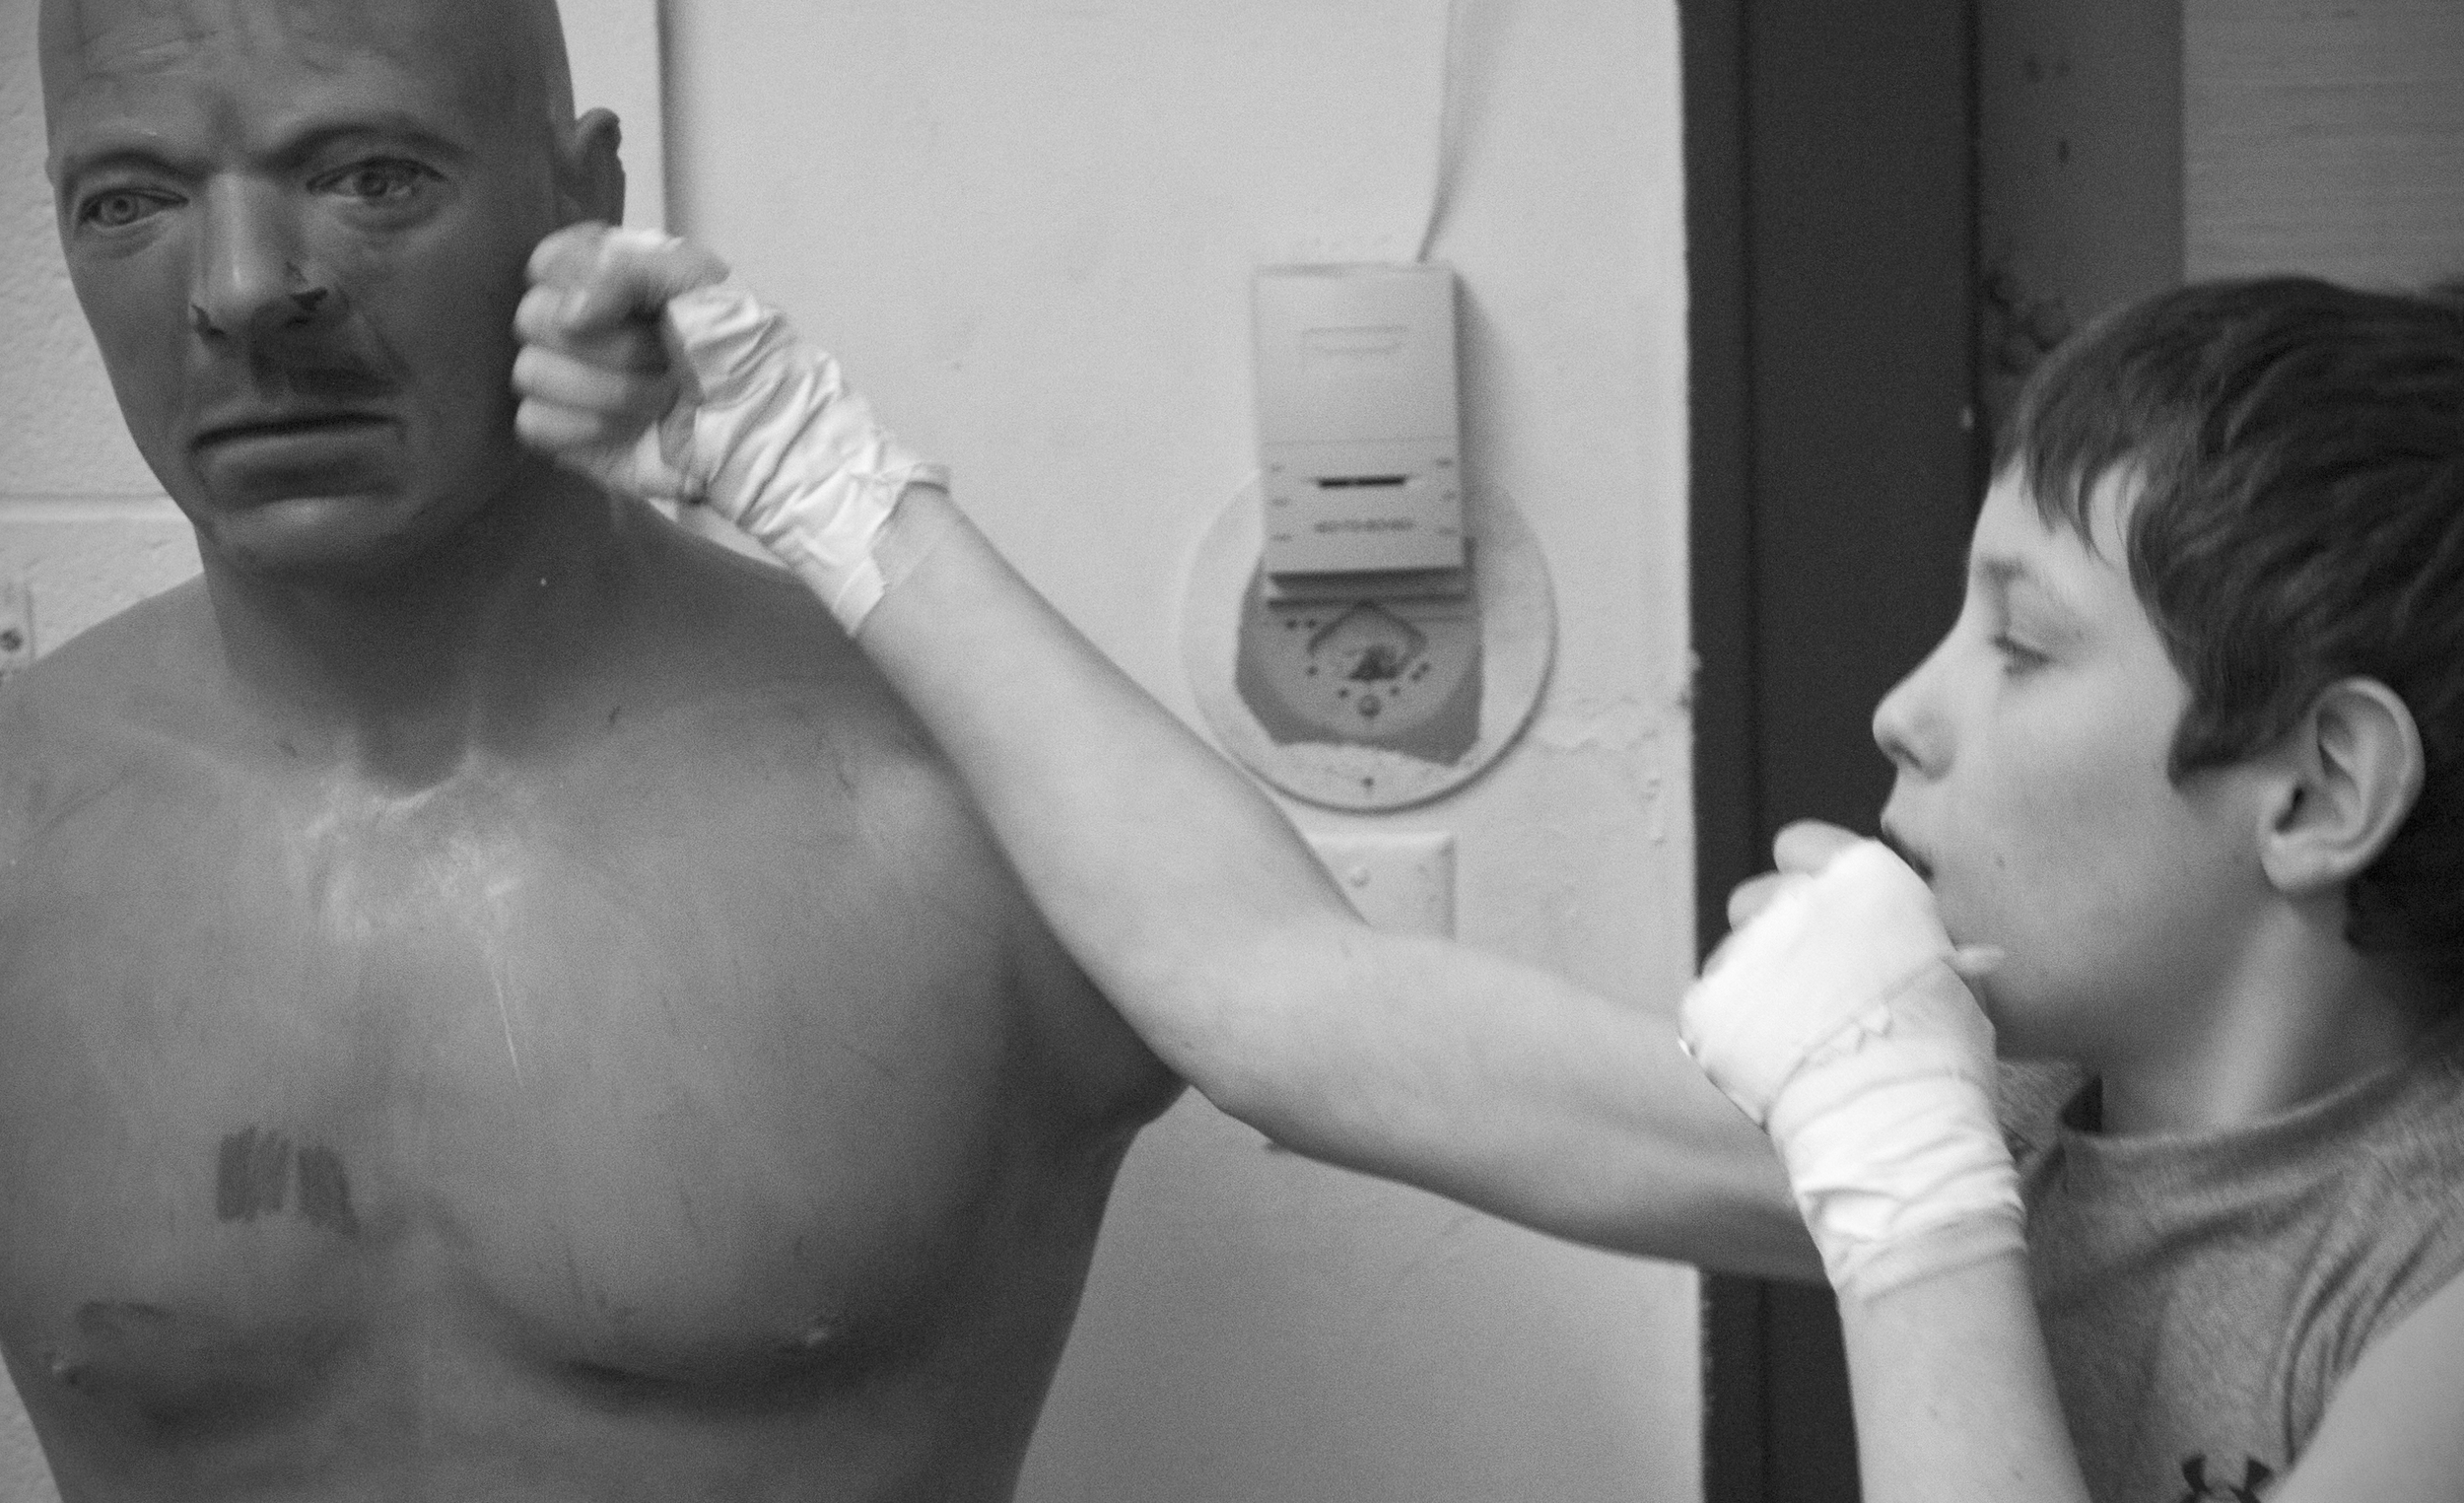  (February 22, 2013) Ben Grey, 11, works a punching bag at the Hannibal Gymnasium in Hannibal, Mo. 